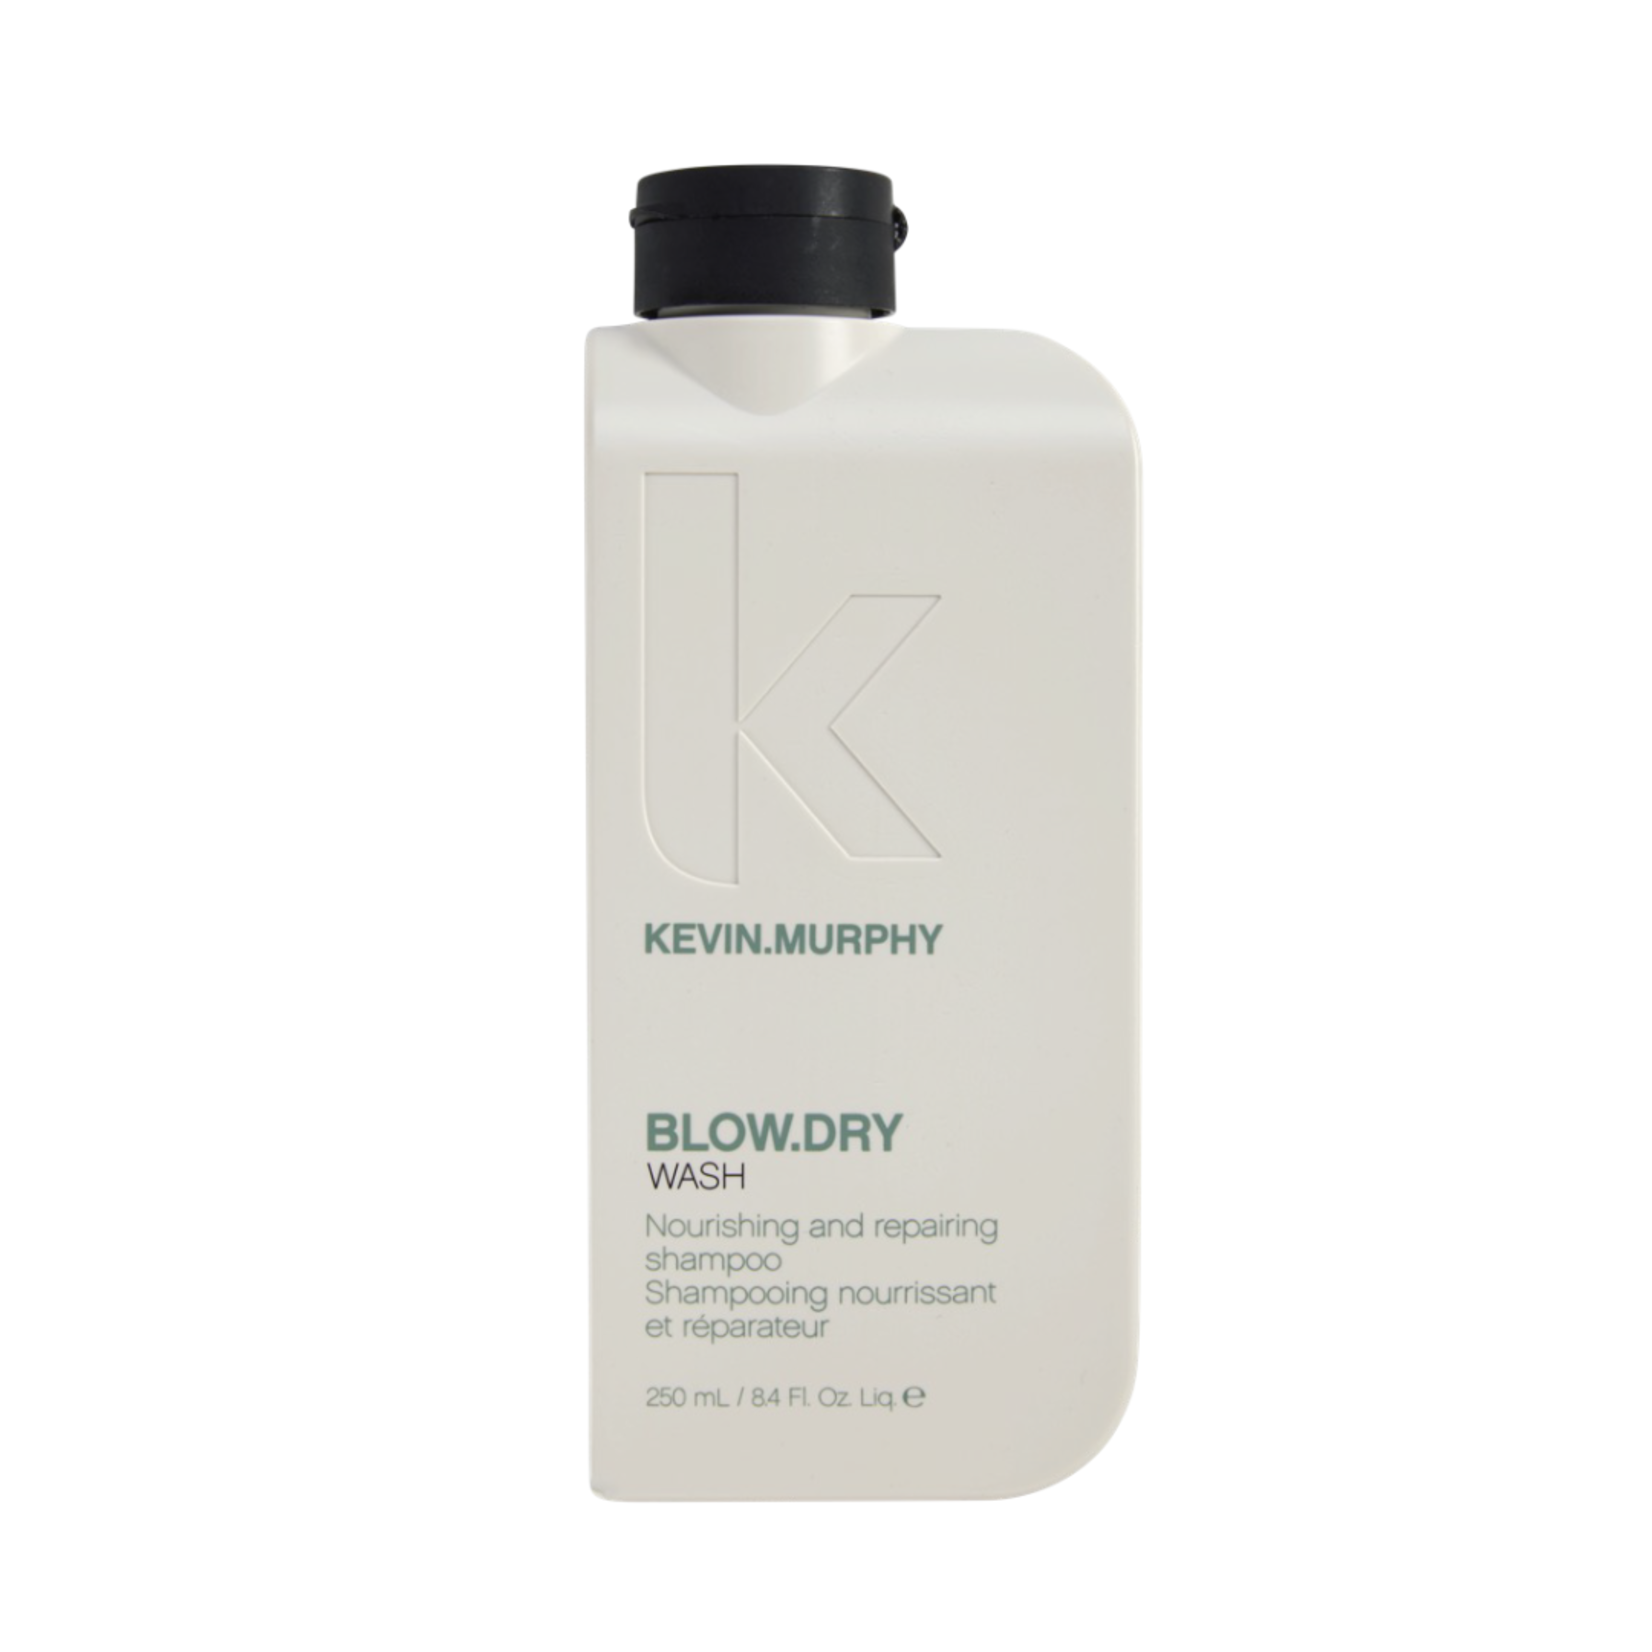 KEVIN.MURPHY KEVIN.MURPHY - BLOW.DRY WASH 8.4 oz